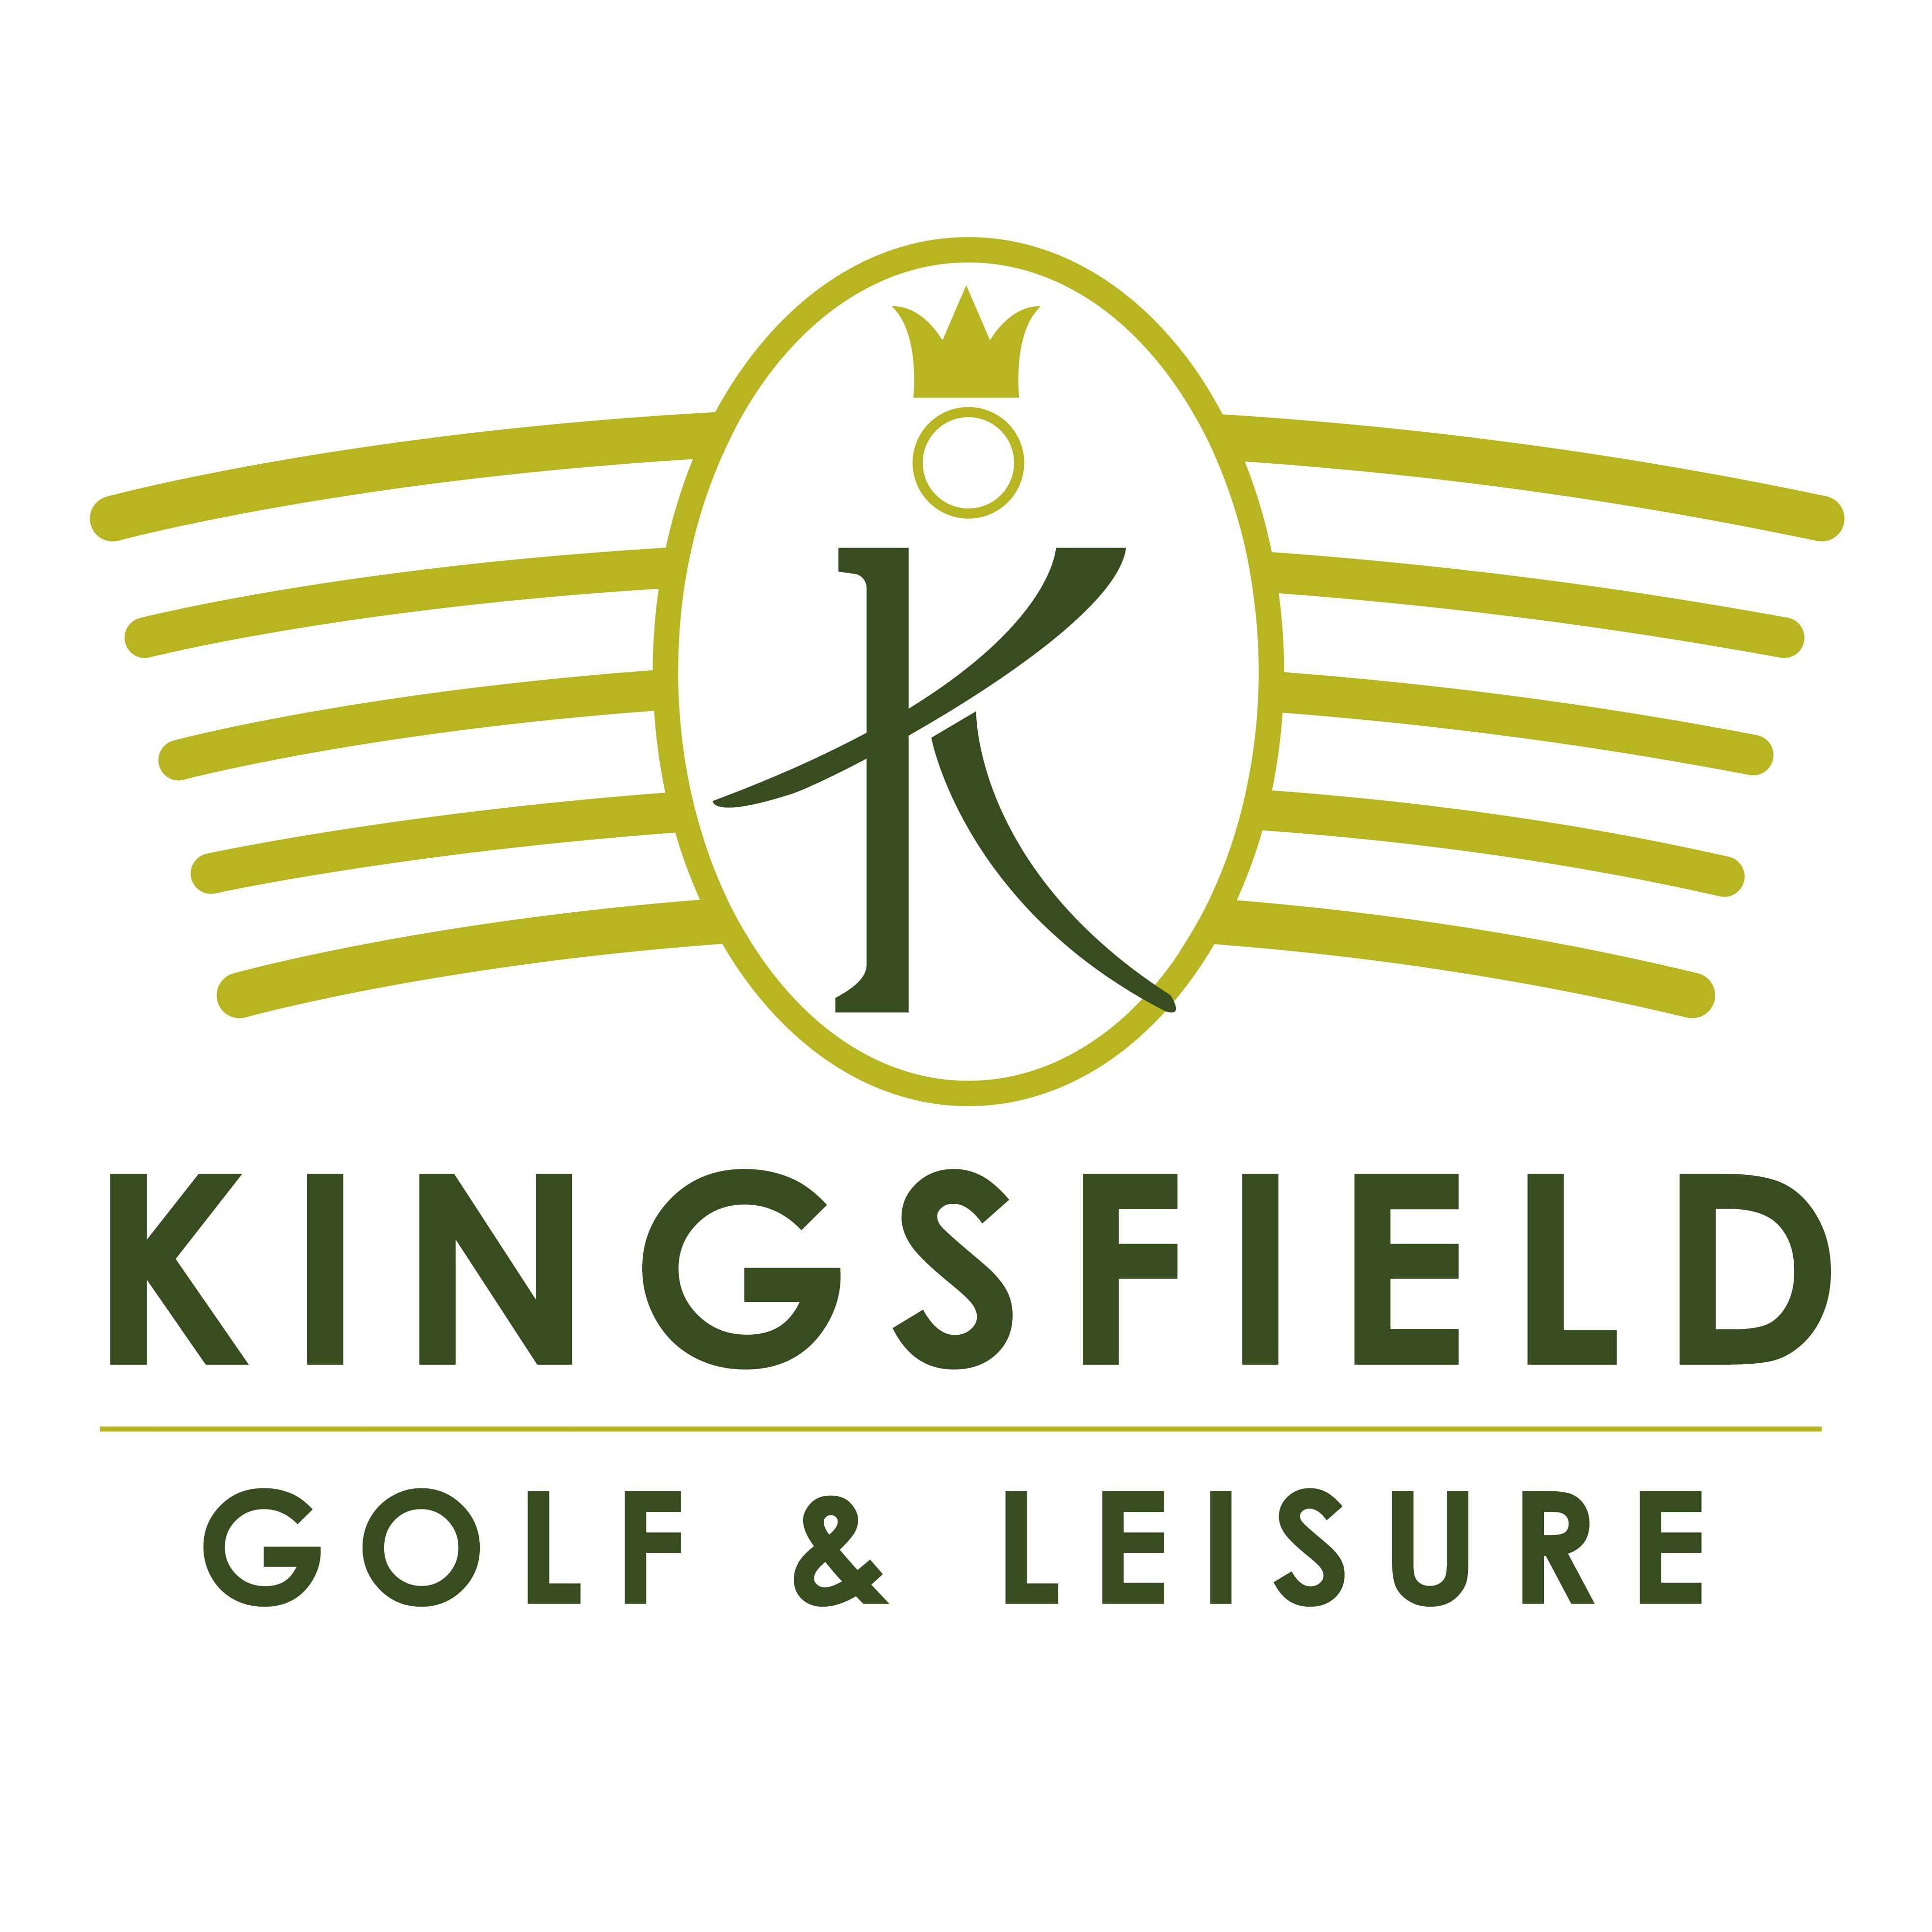 Kingsfield Golf and Leisure